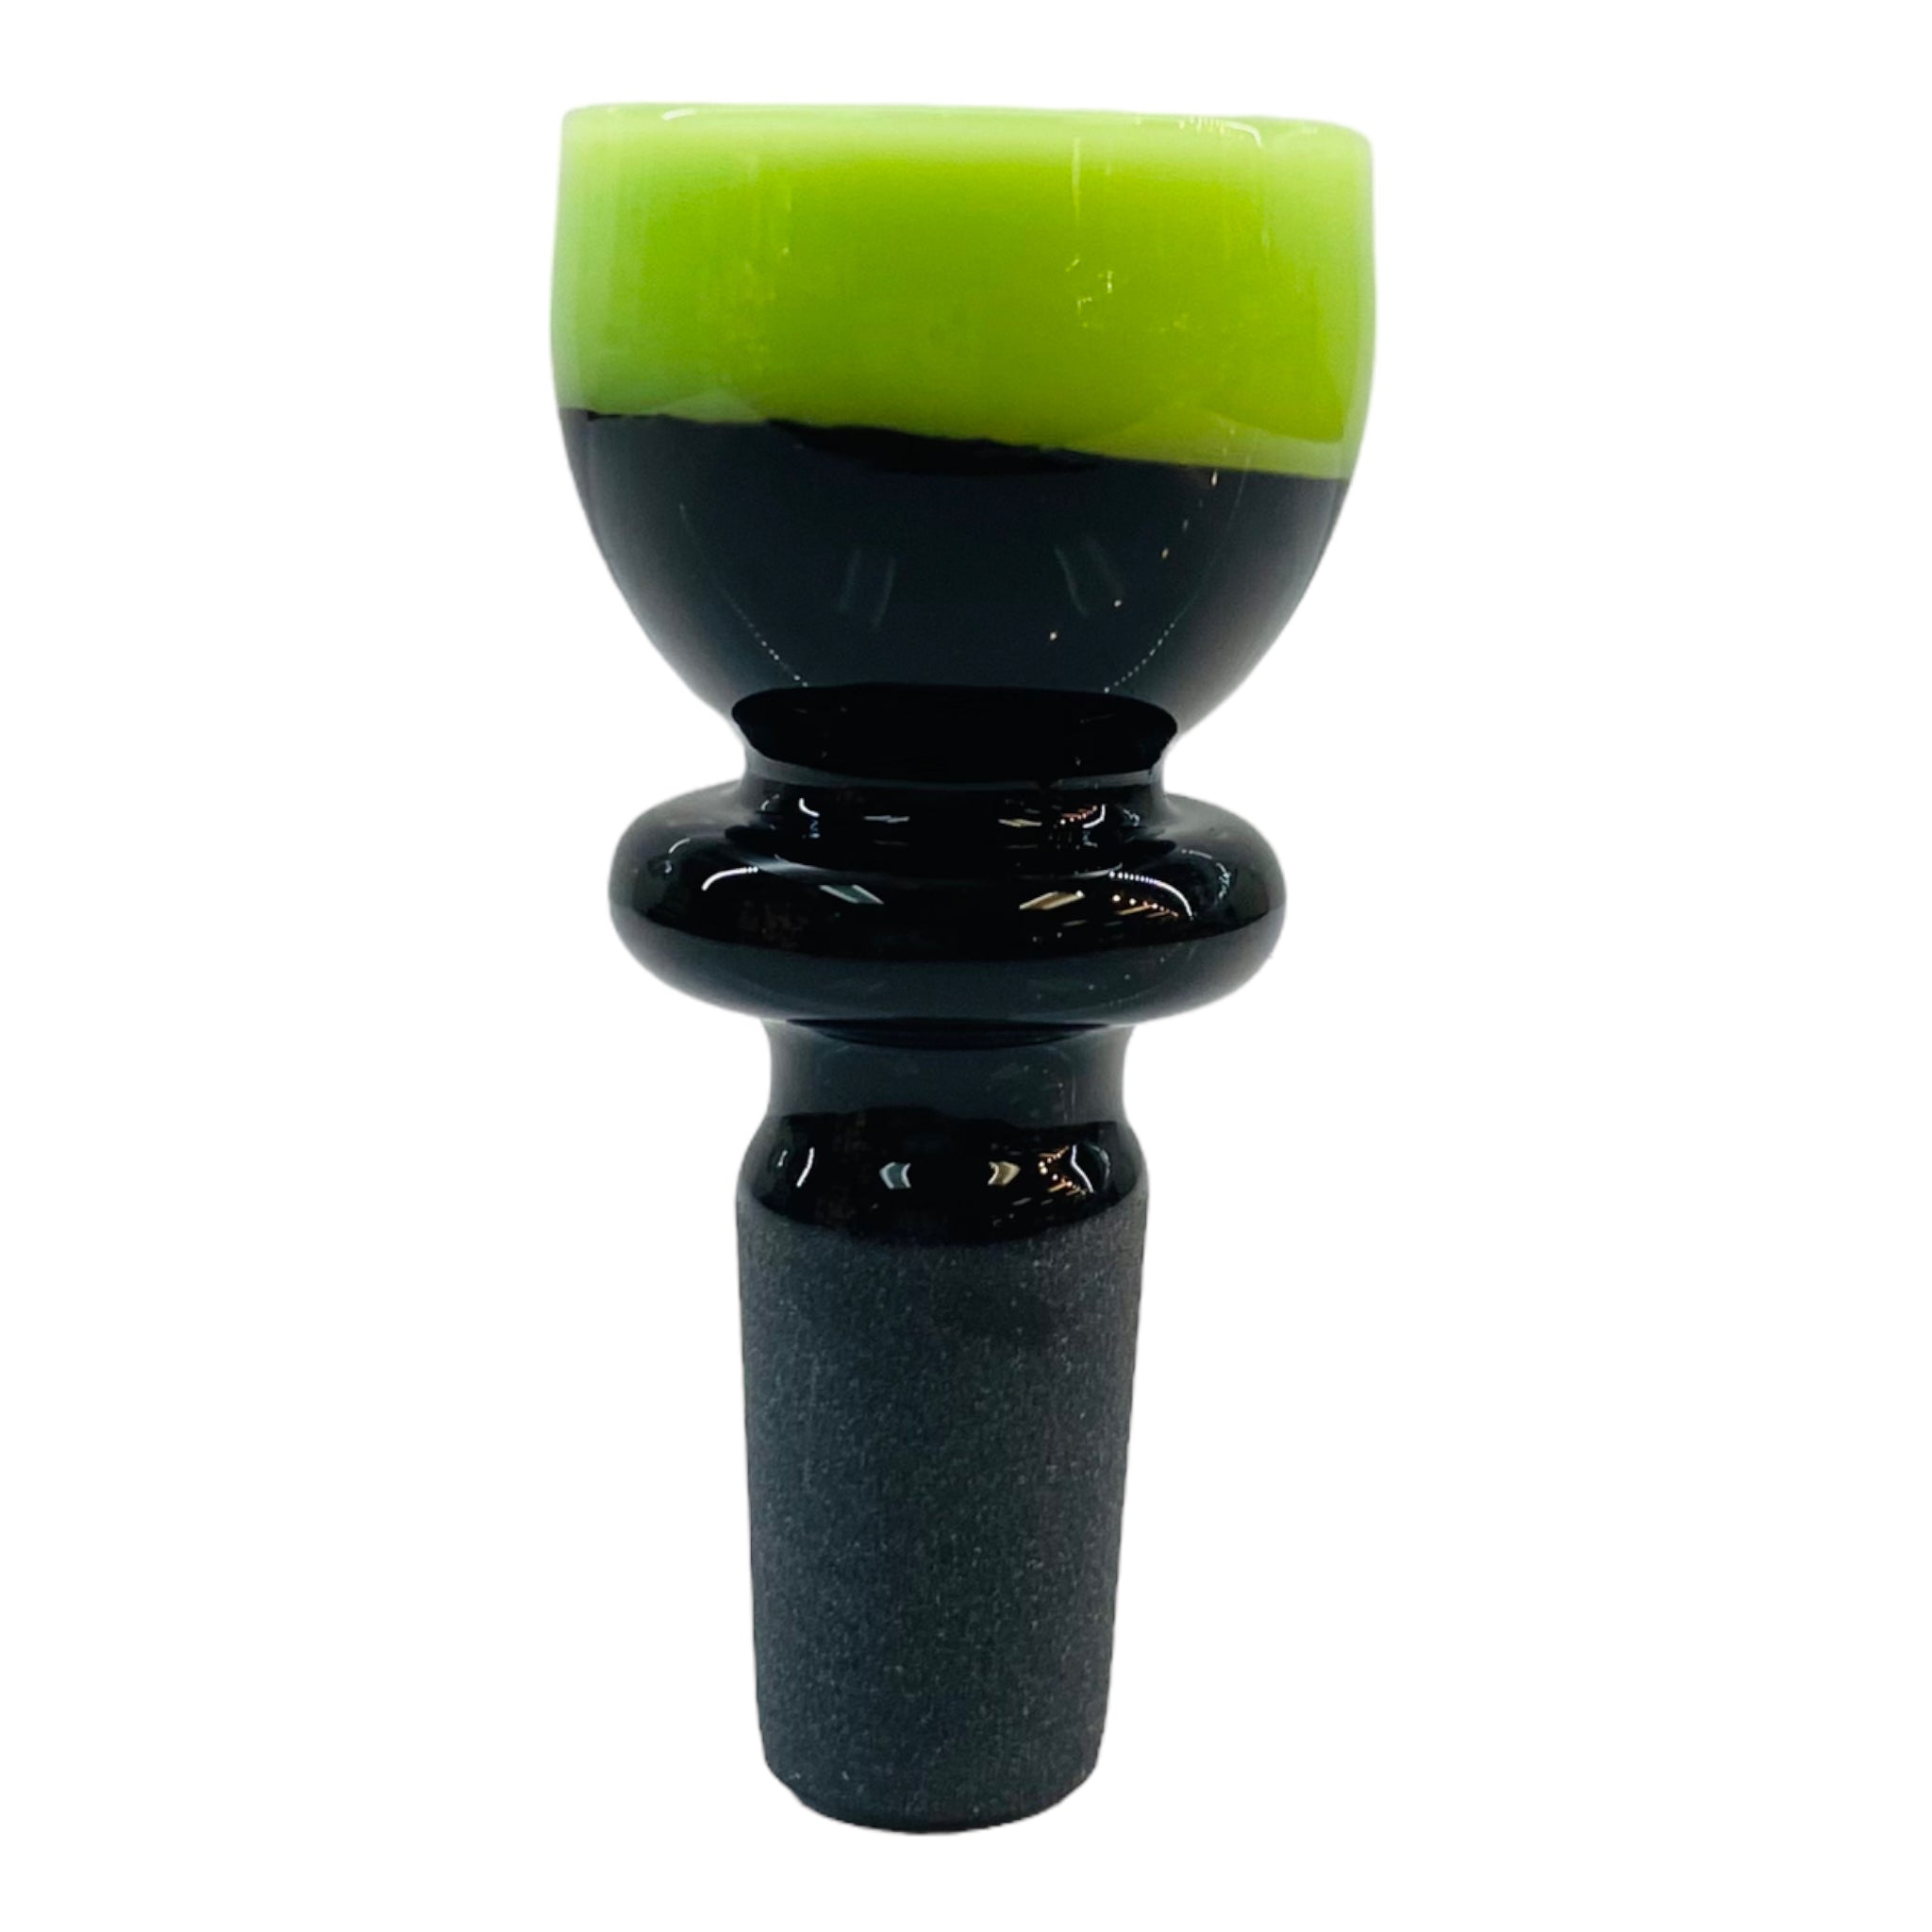 14mm Flower Bowl - Black Fitting With Color Rim - Slime Green